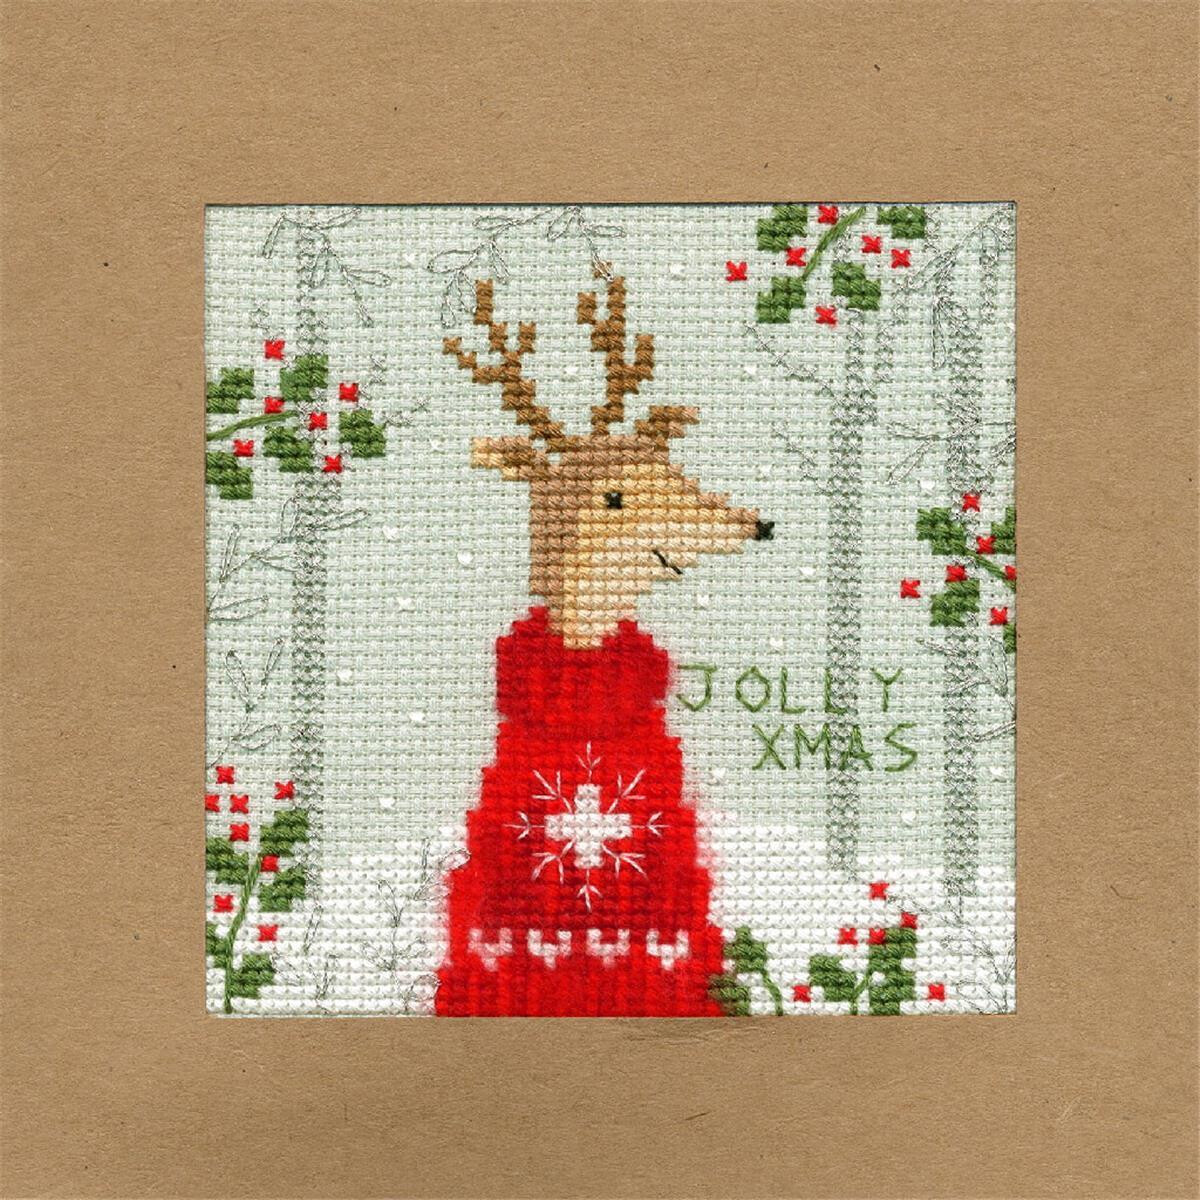 An embroidery with a reindeer in a red sweater with a...